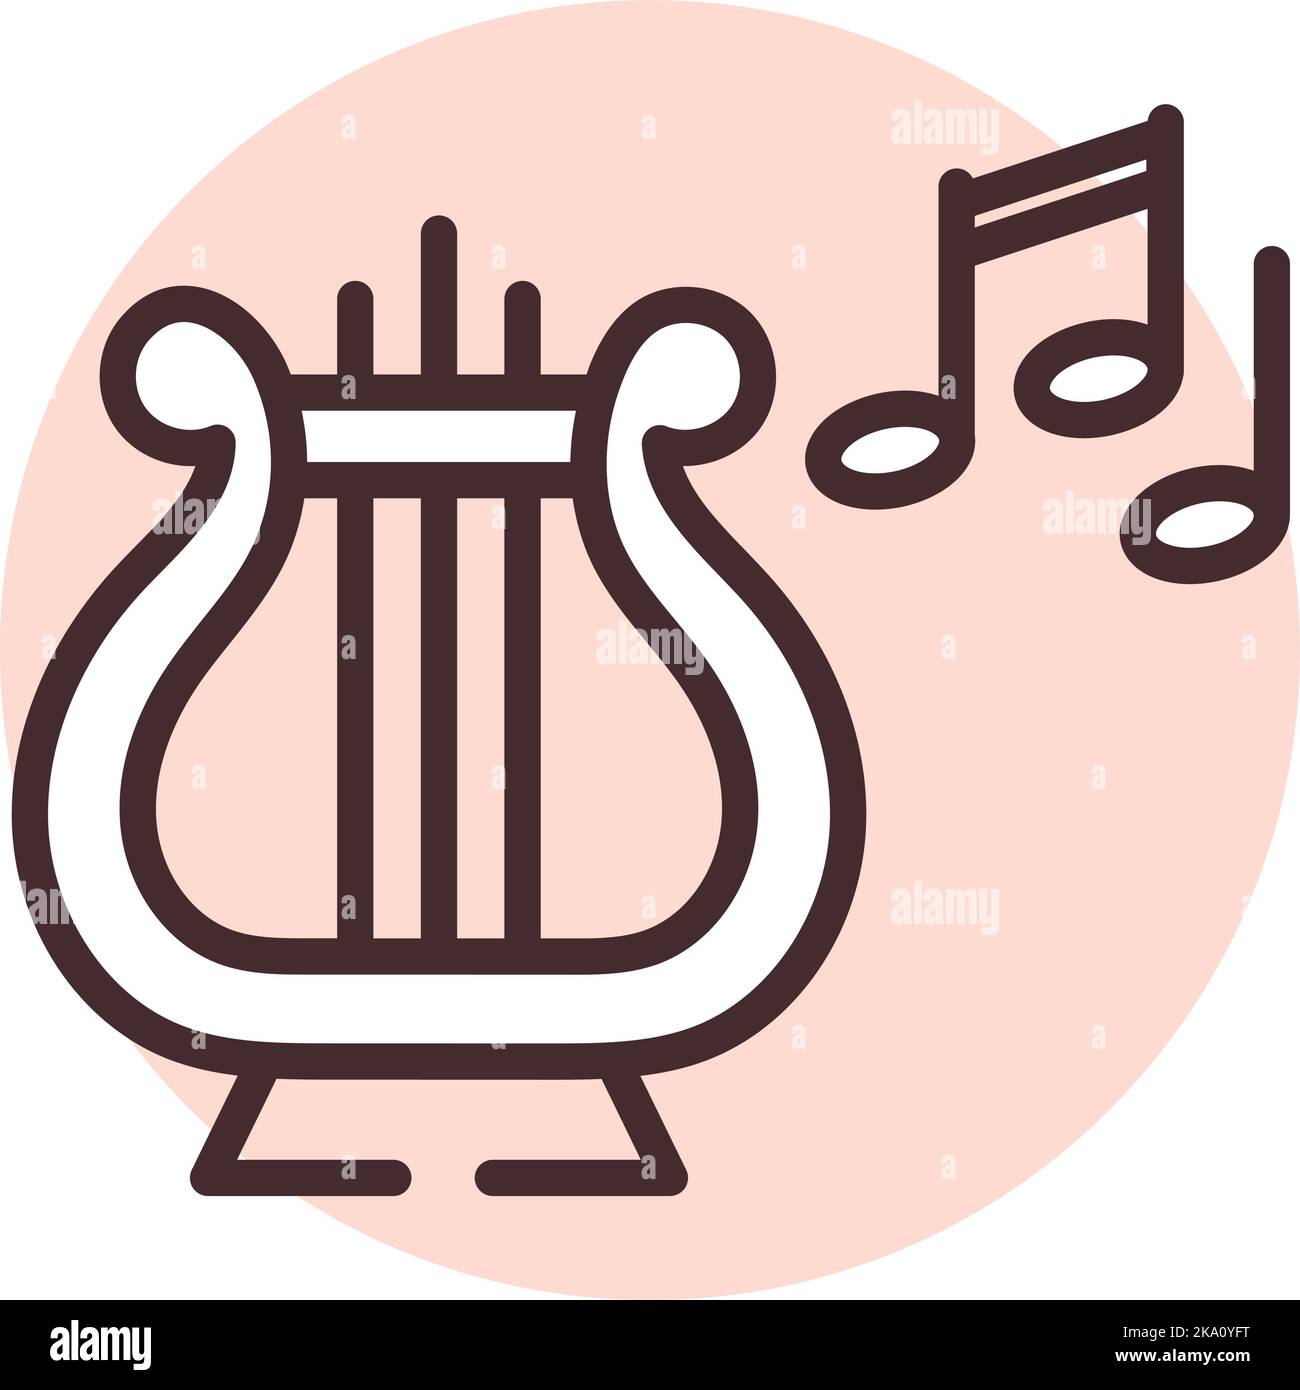 Event music, illustration or icon, vector on white background. Stock Vector